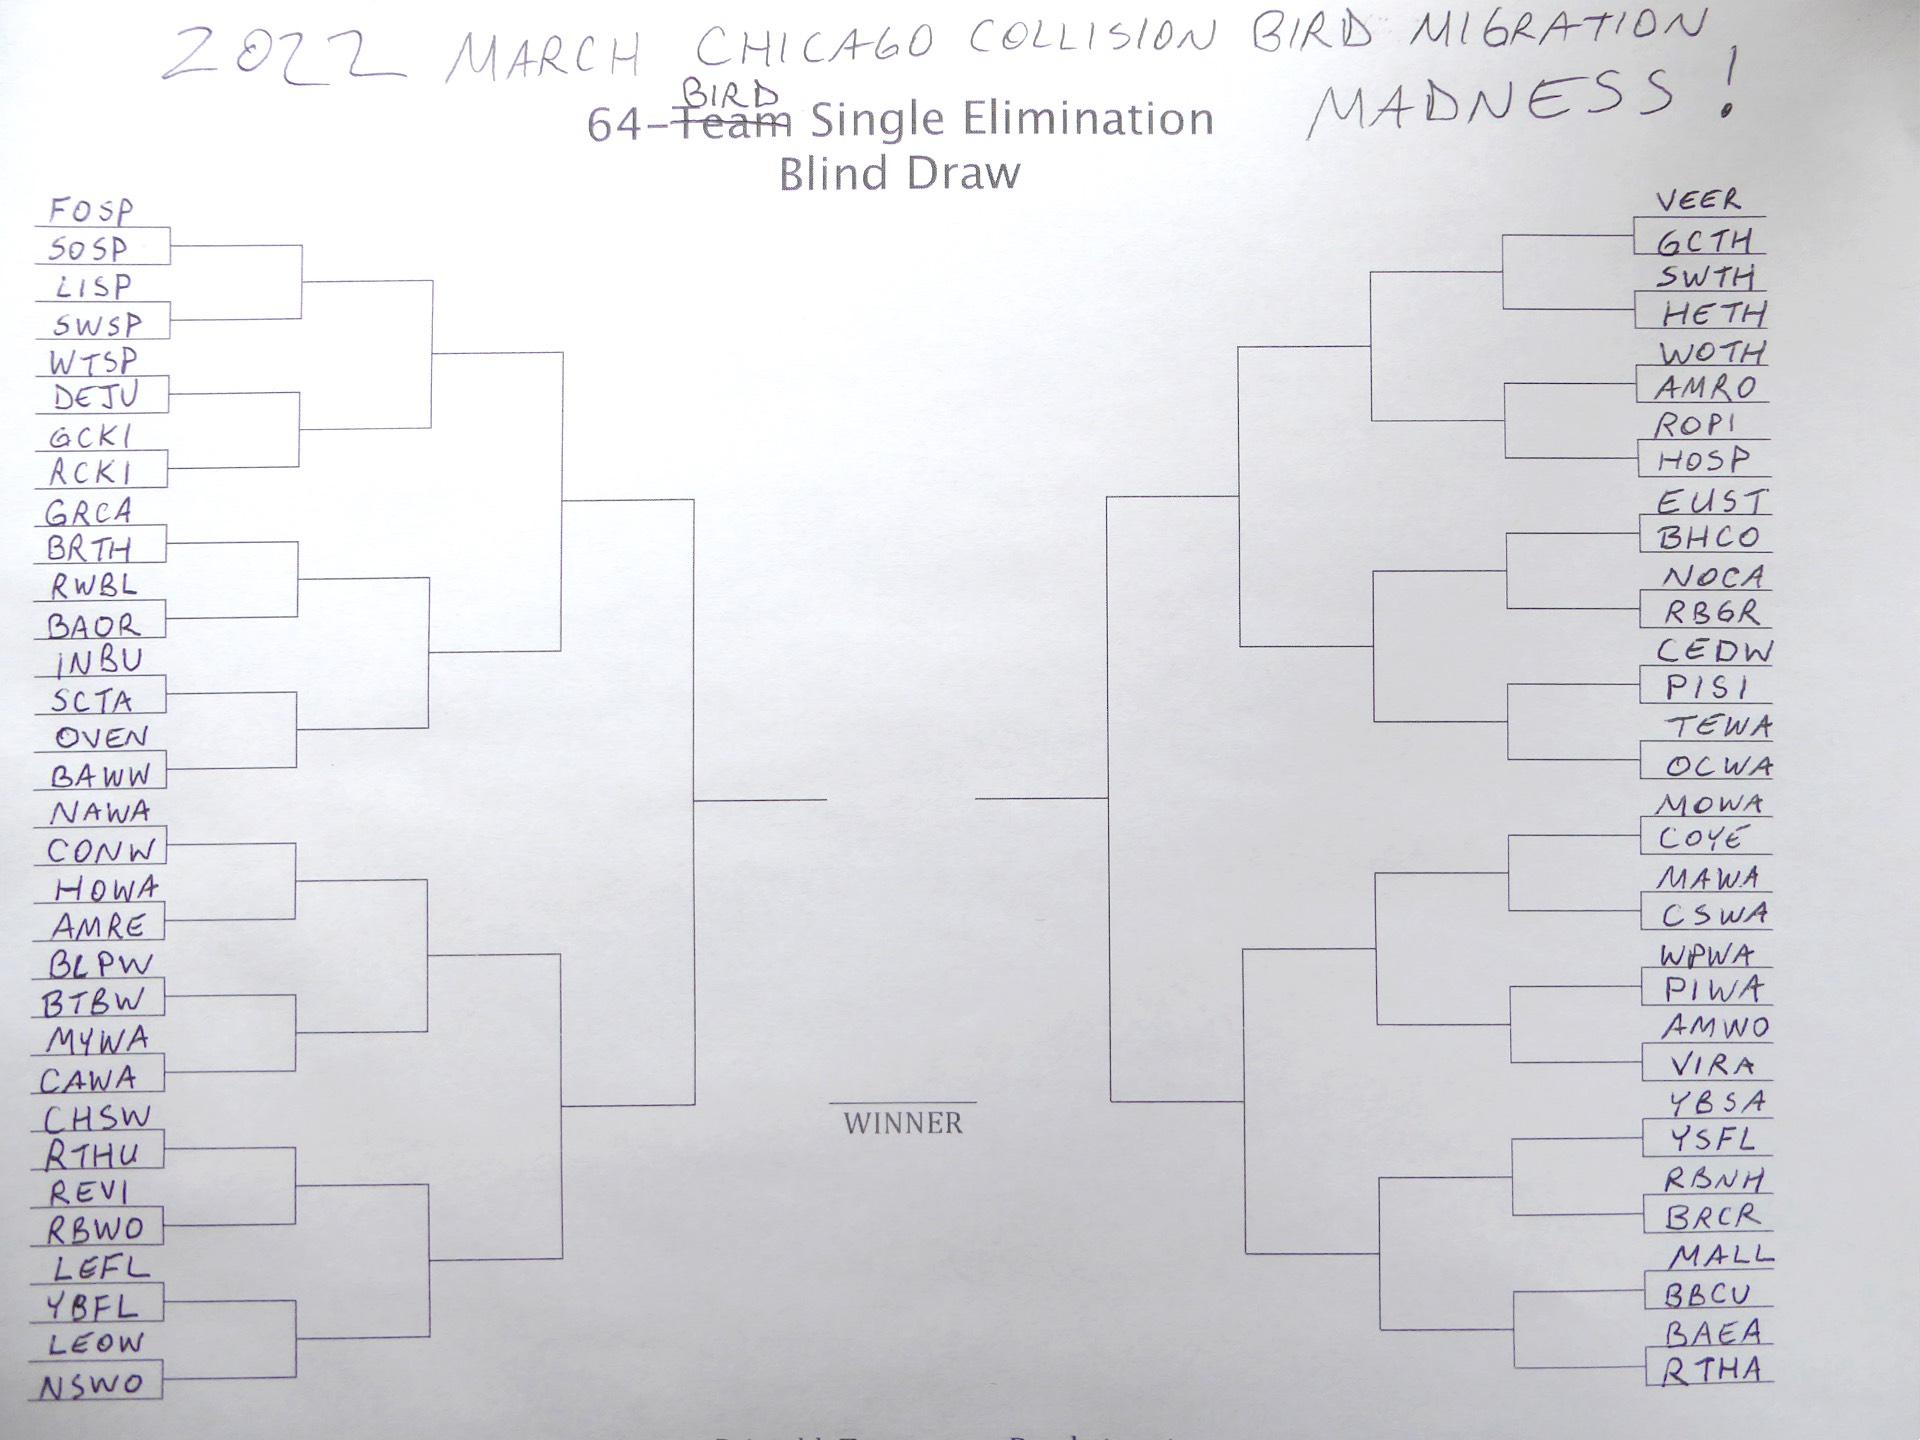 The Chicago Collision Bird Migration Madness bracket. Creator Robyn Detterline used birds' four-letter banding codes —FOSP is fox sparrow, for example — when creating the matchups. (Robyn Detterline / Twitter)